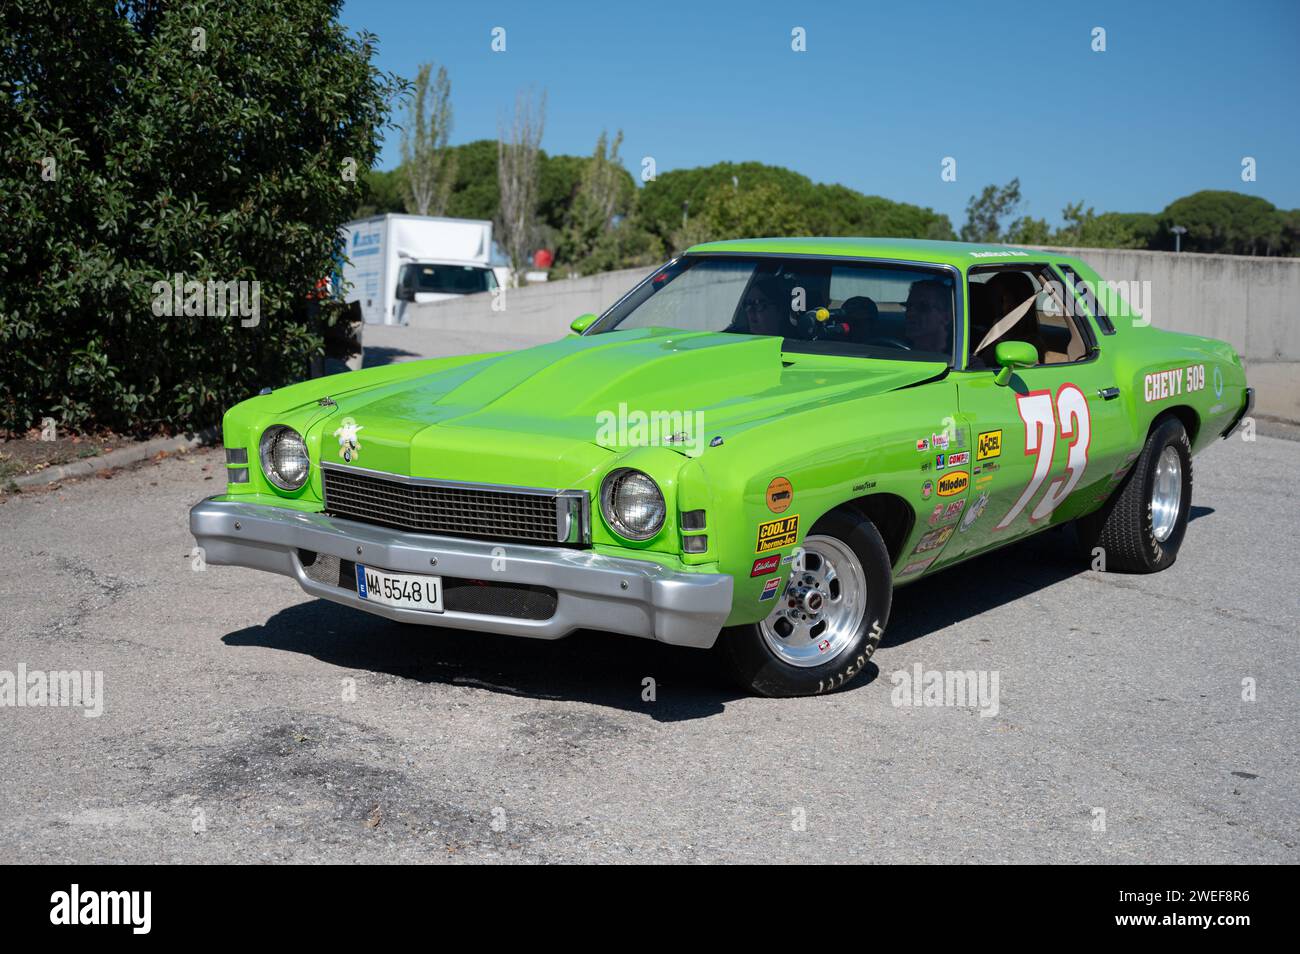 Front view of an impressive green second-generation Chevrolet Monte Carlo American muscle car prepared for quarter-mile drag racing Stock Photo